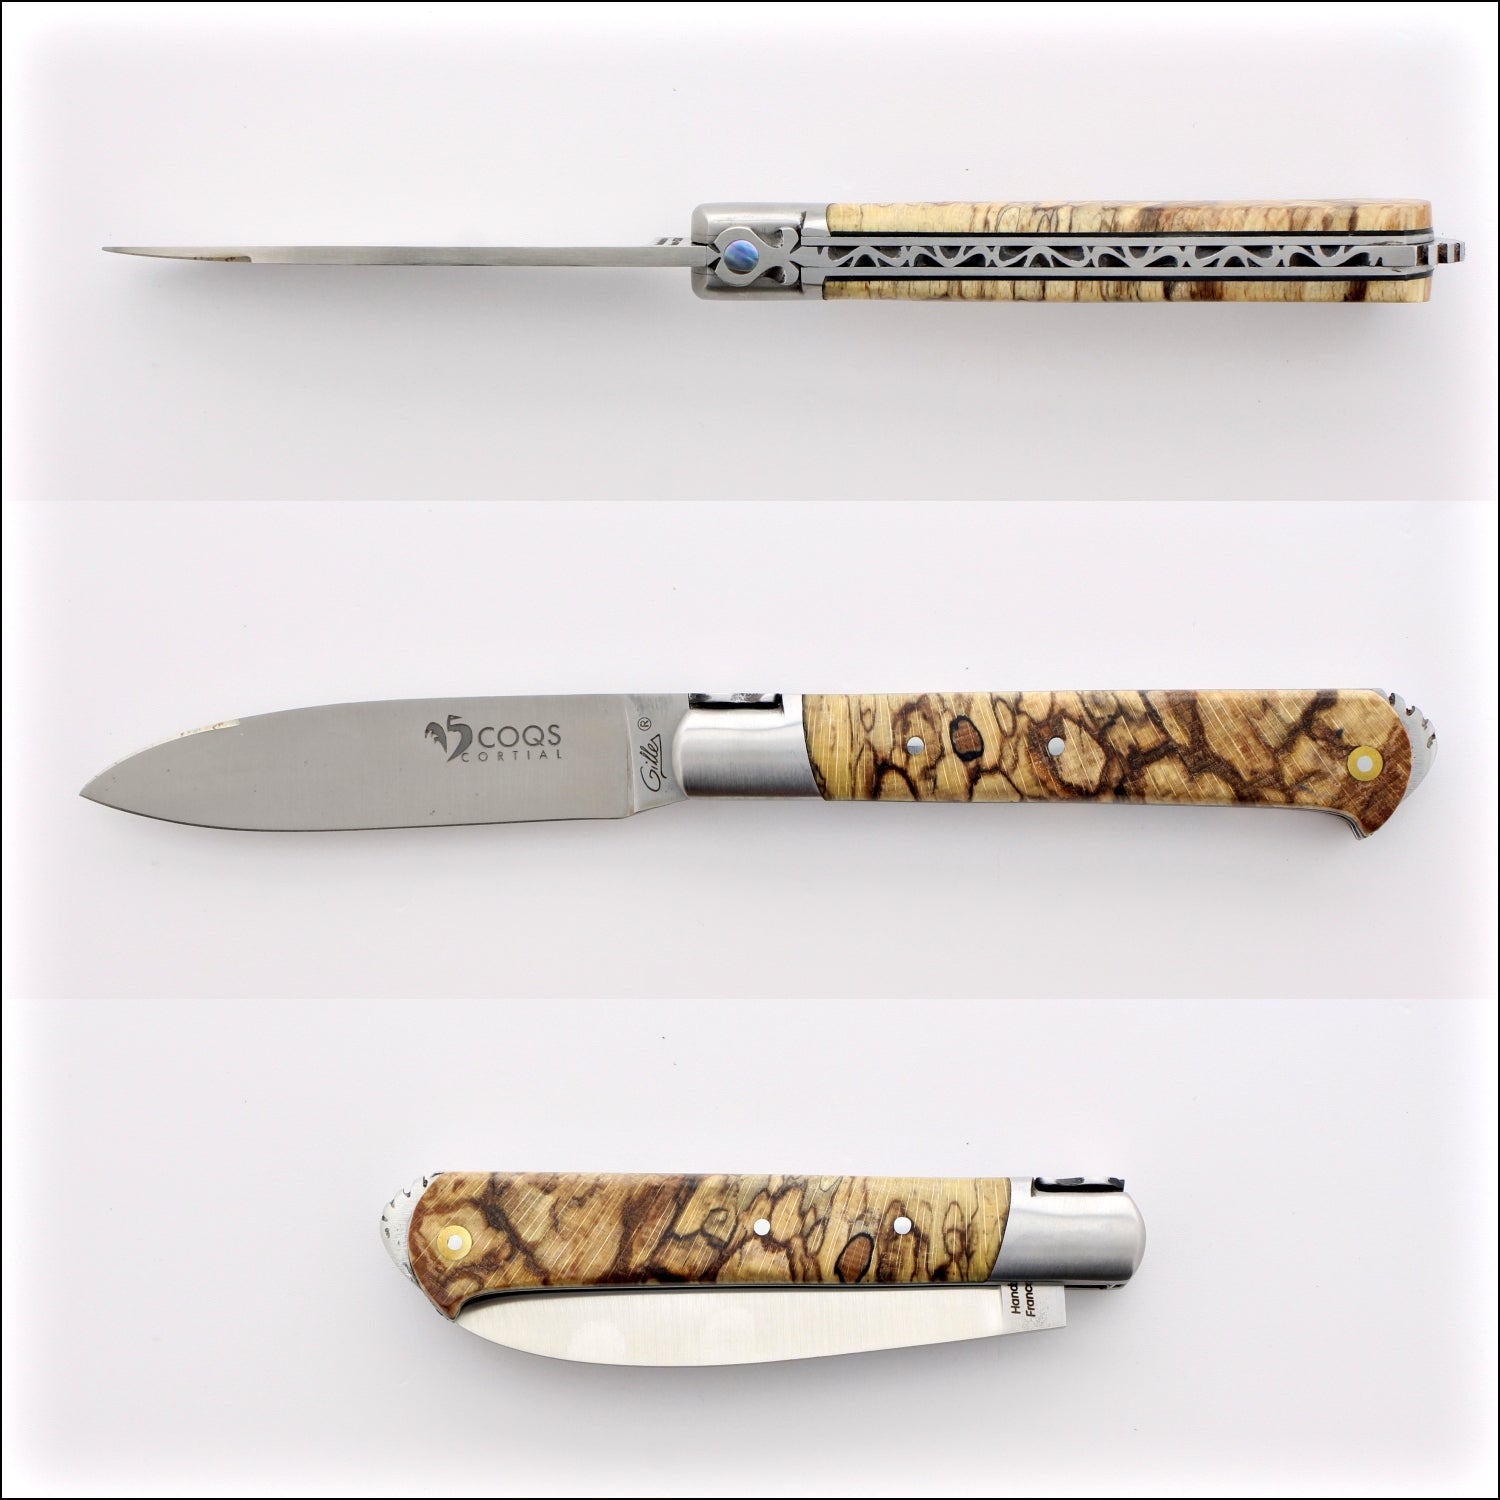 5 Coqs Pocket Knife - Burled Beech End Grain & Mother of Pearl Inlay